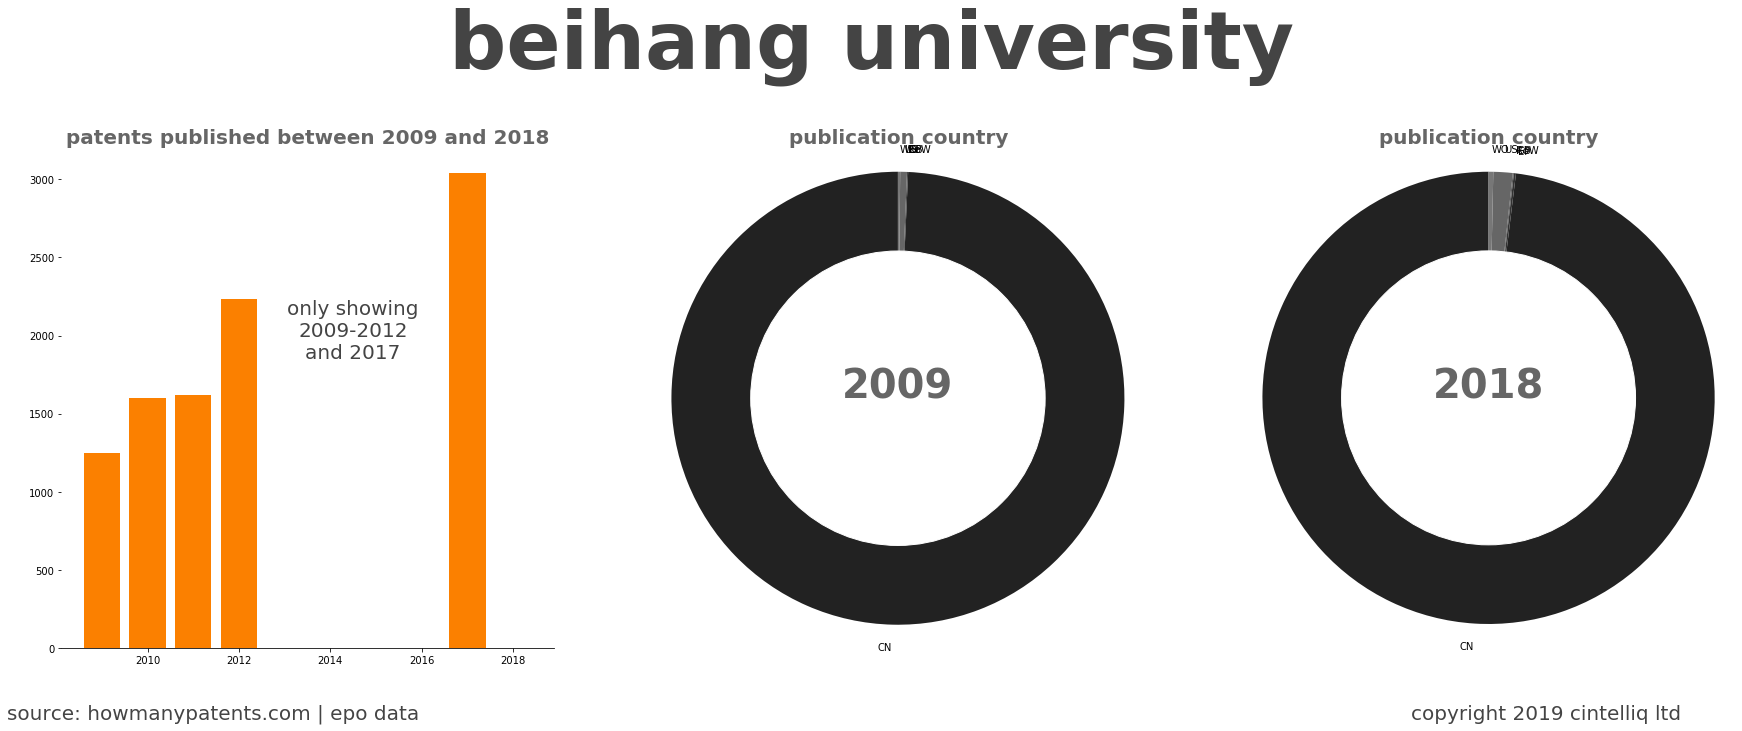 summary of patents for Beihang University